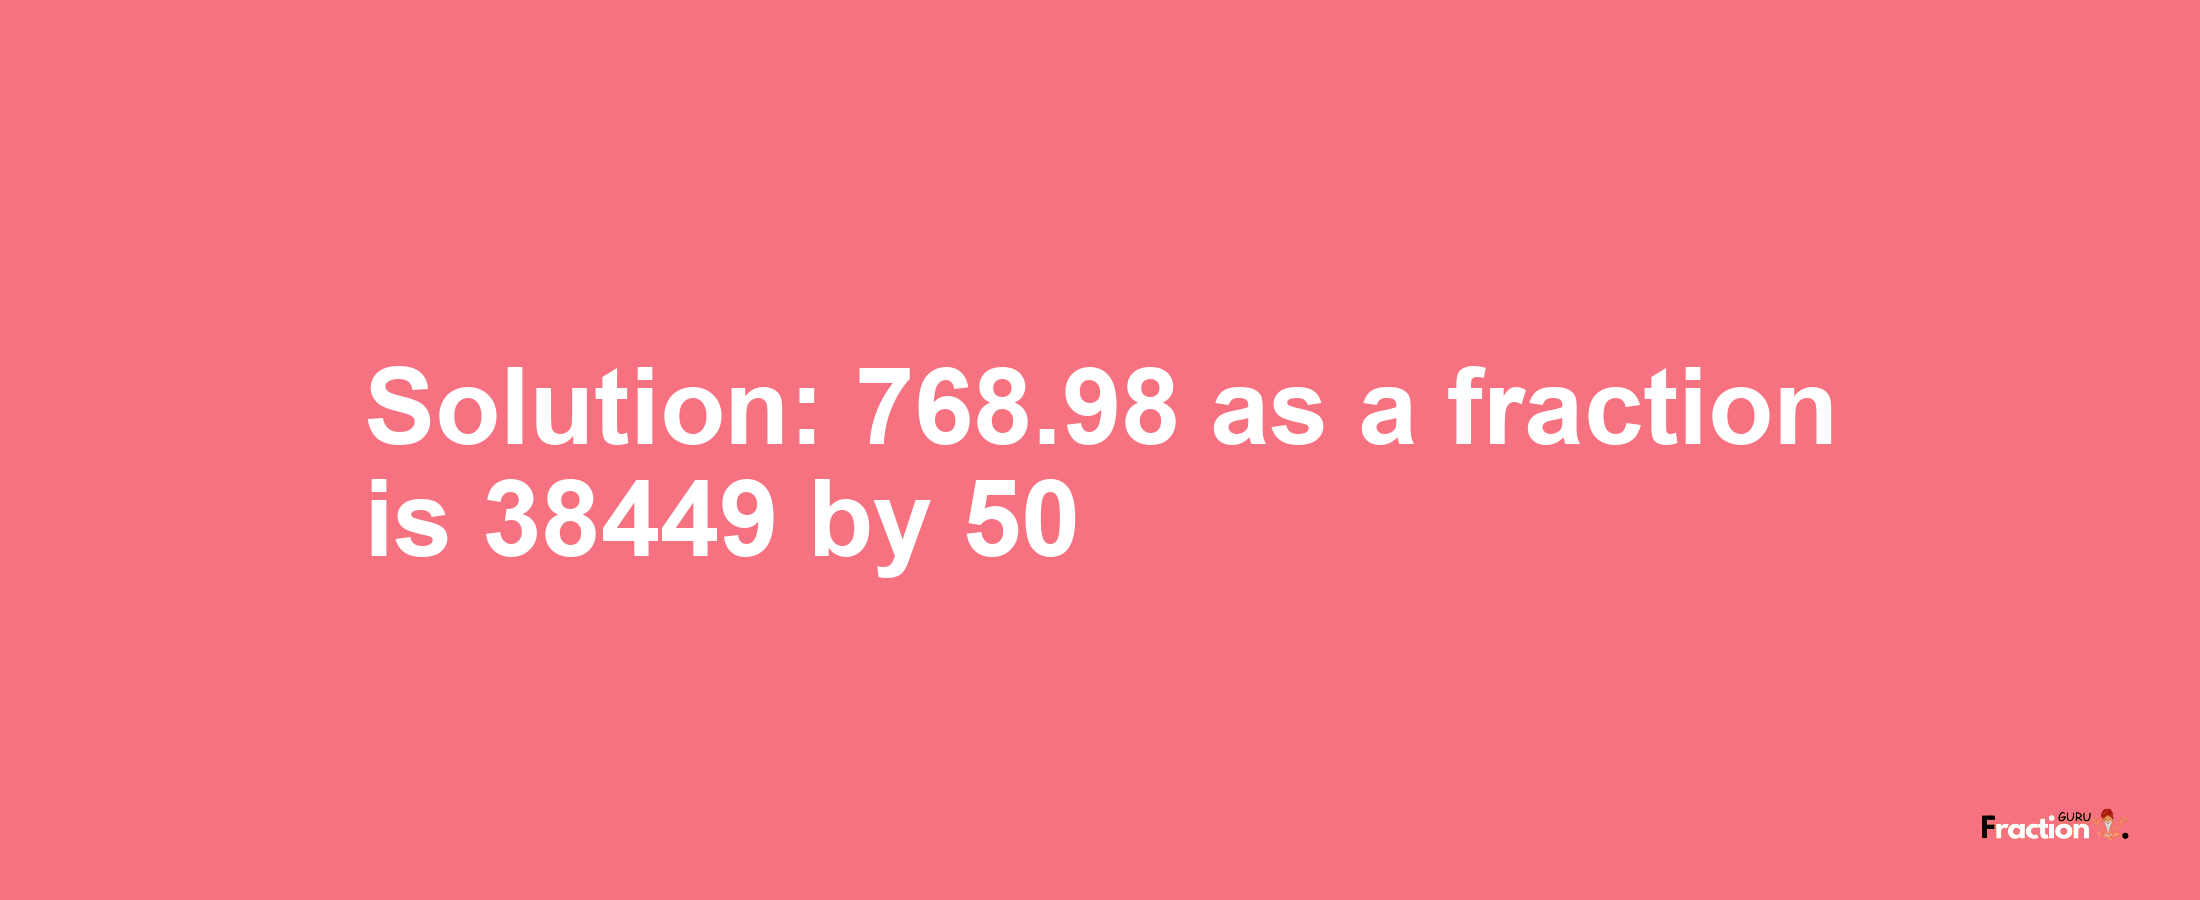 Solution:768.98 as a fraction is 38449/50